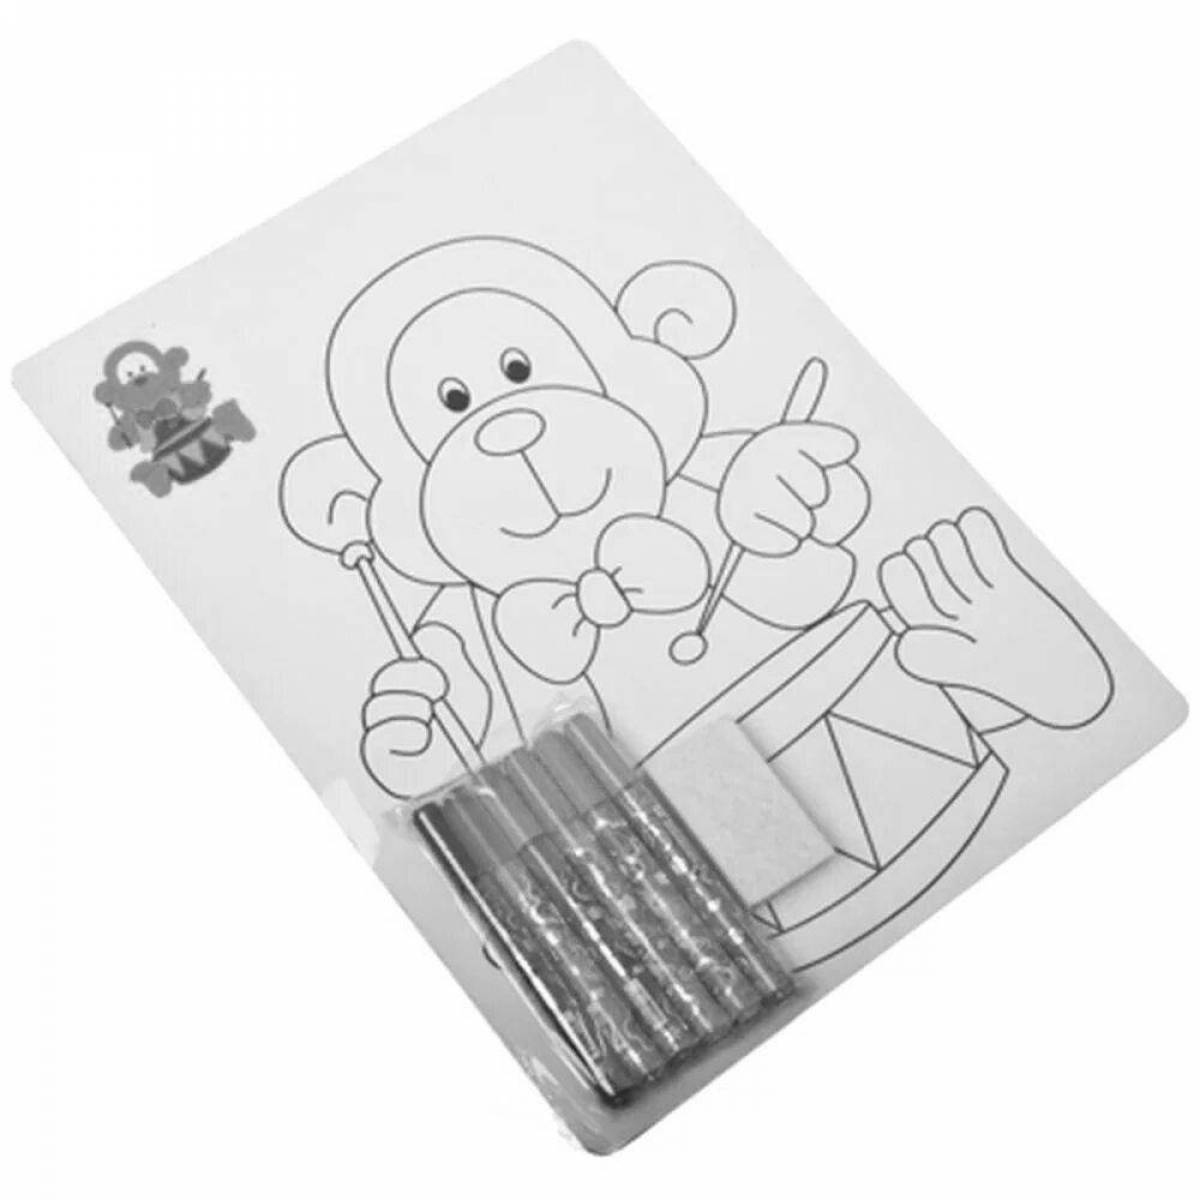 Rich coloring page markers